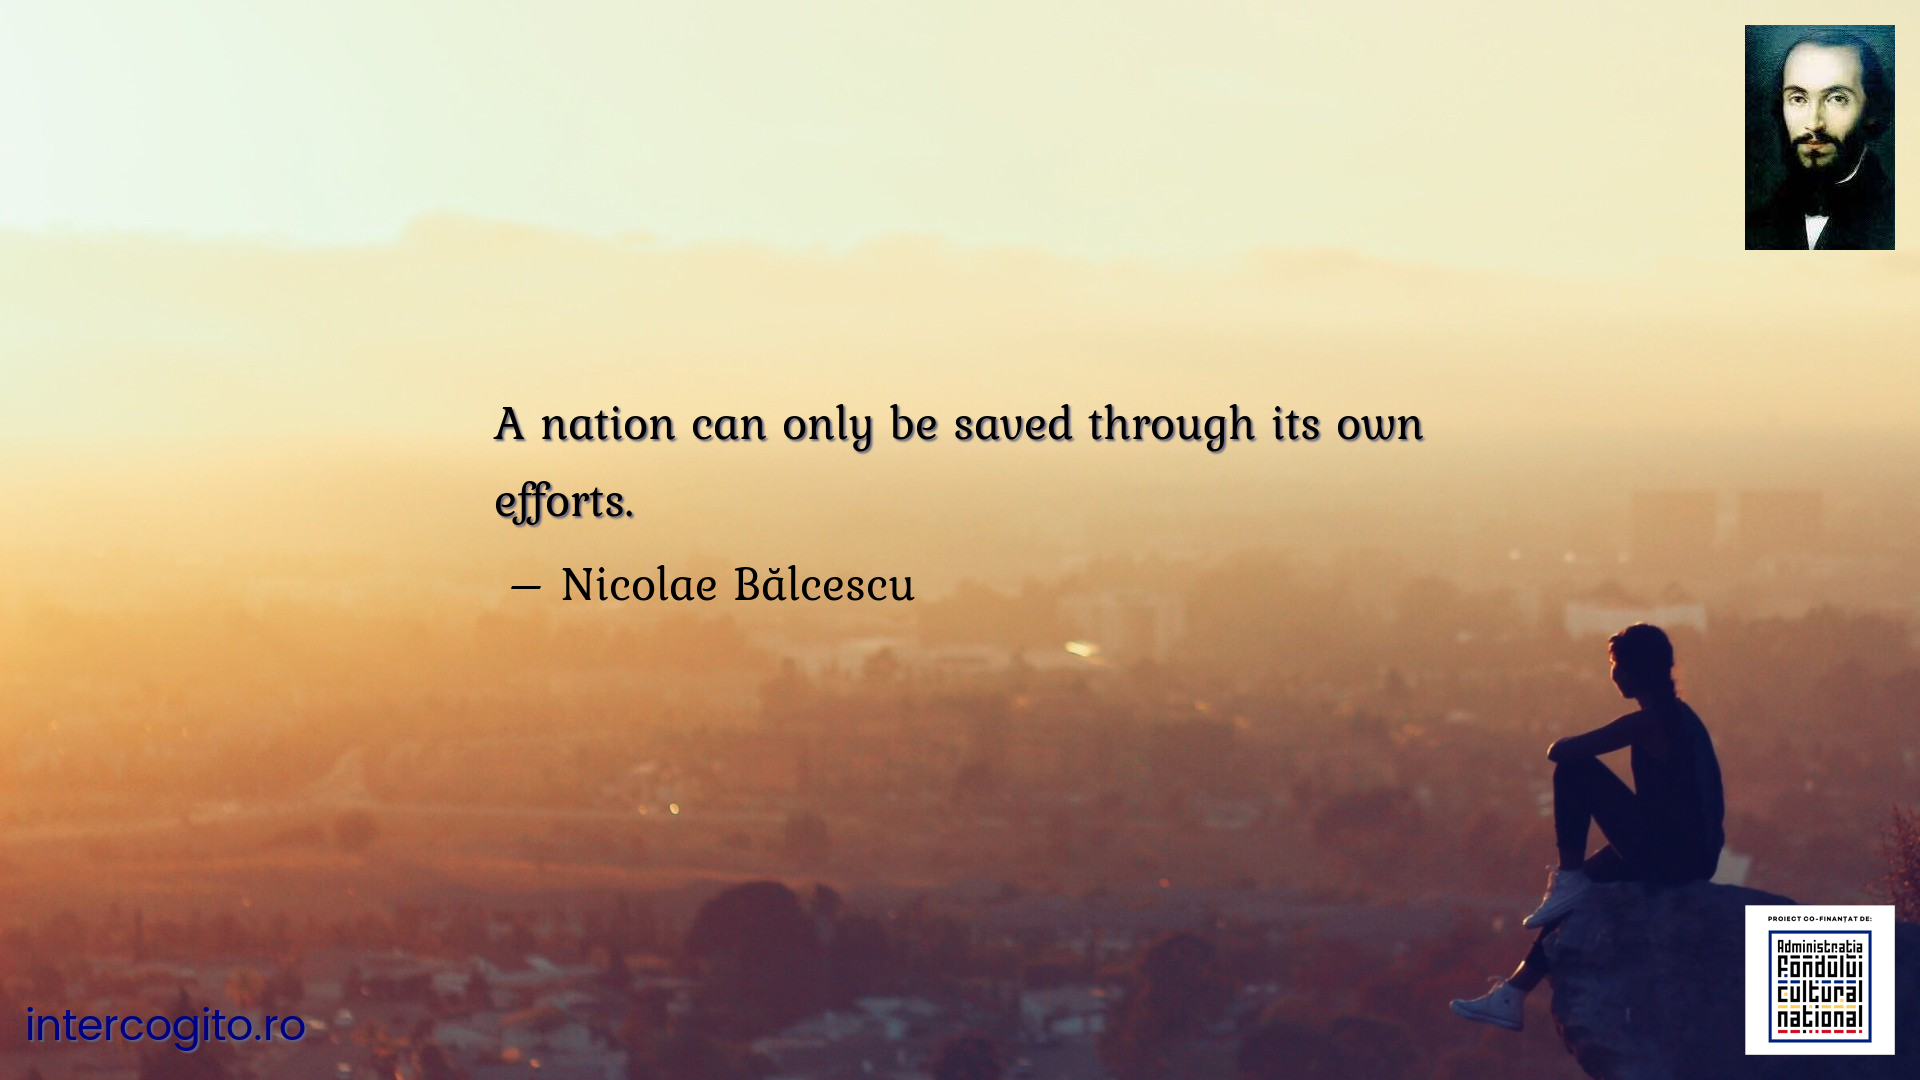 A nation can only be saved through its own efforts.